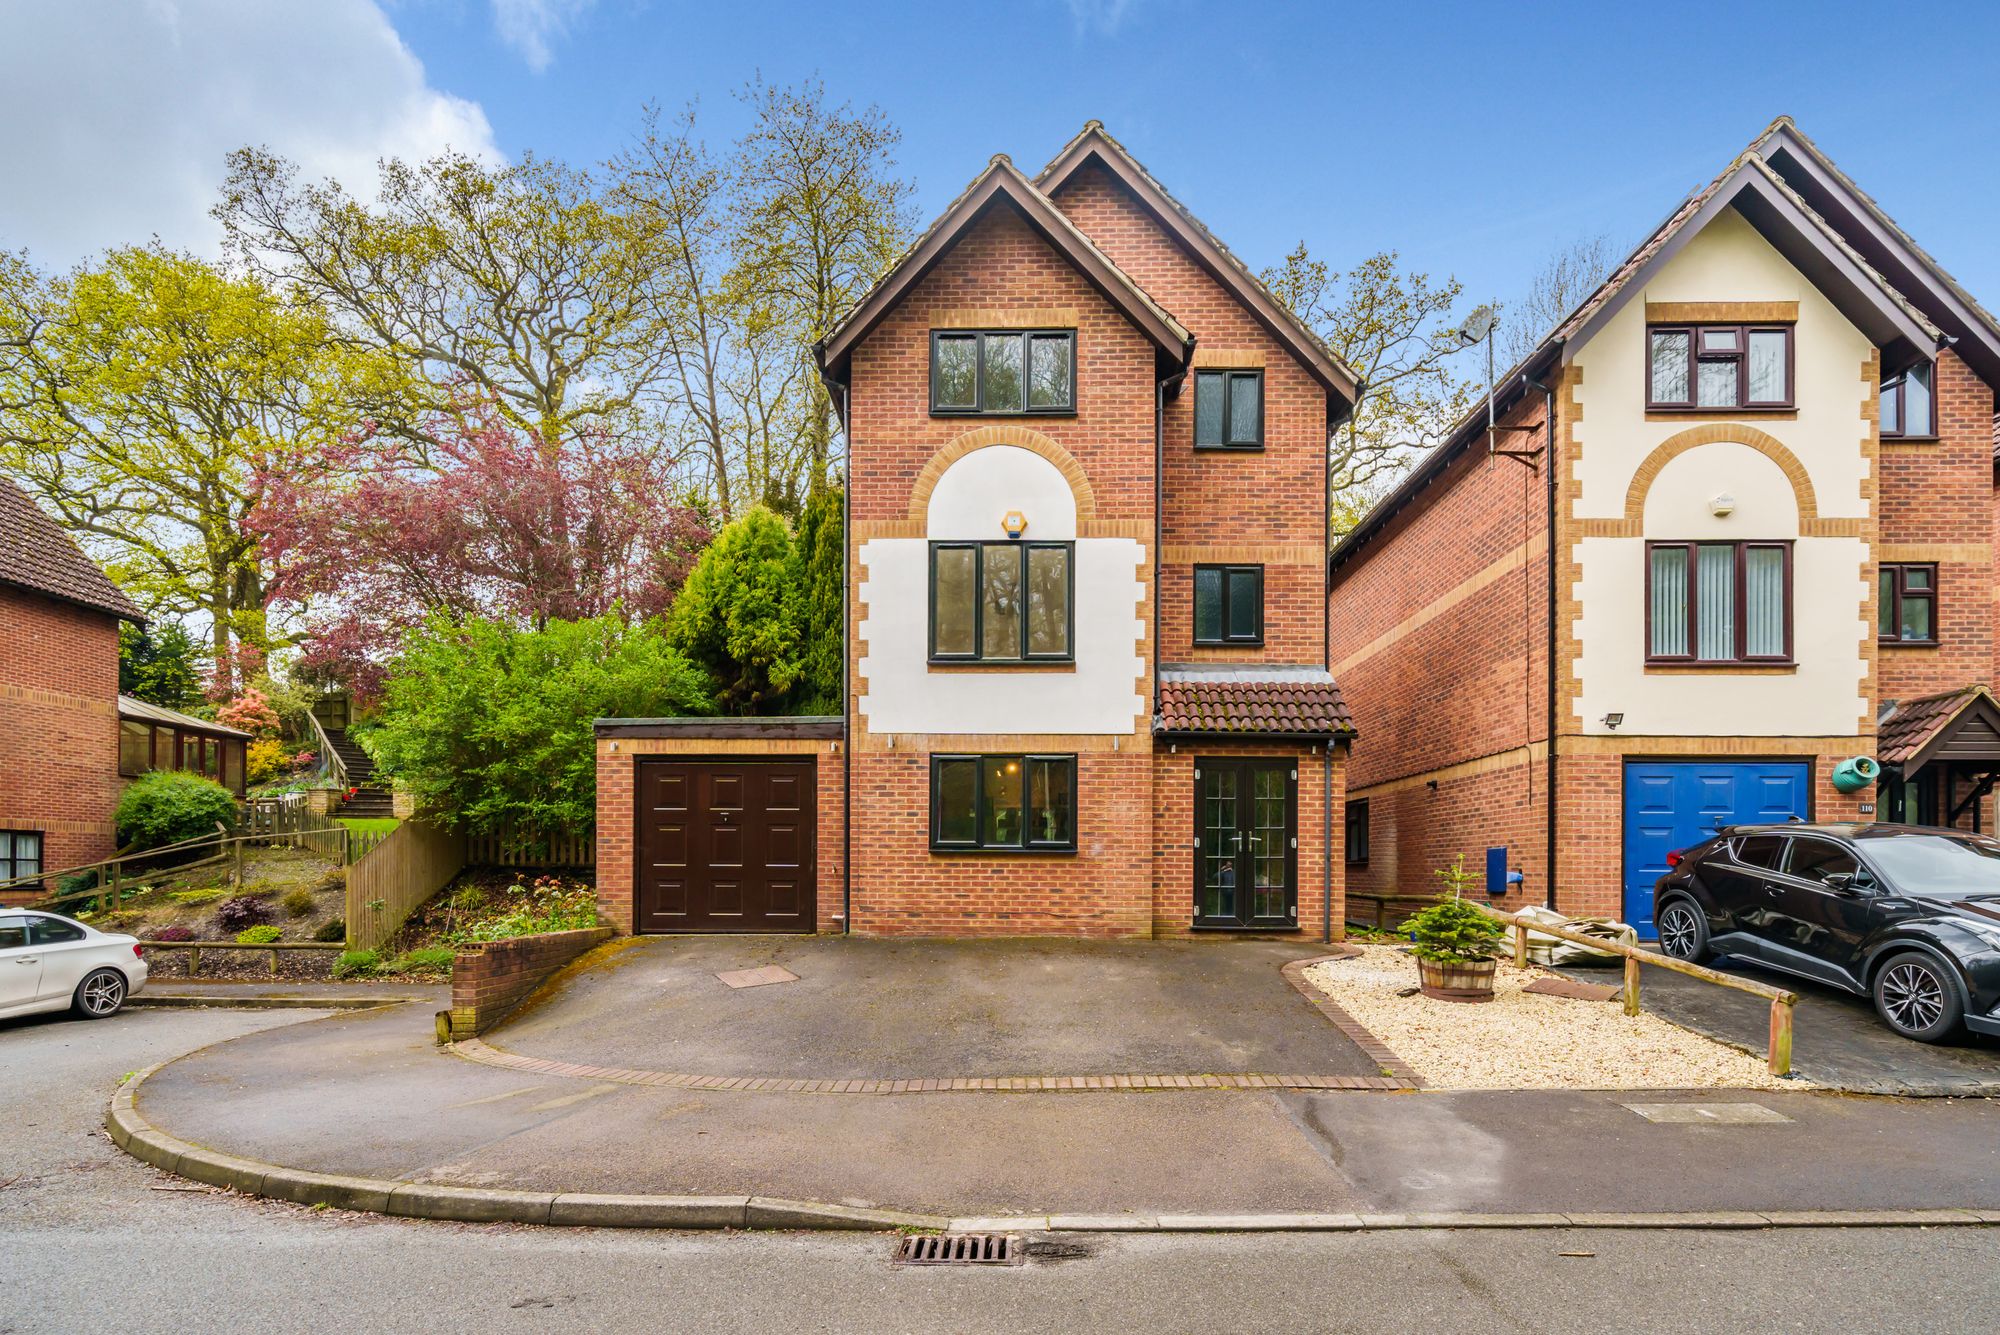 4 bed detached house for sale in Starlings Drive, Reading - Property Image 1